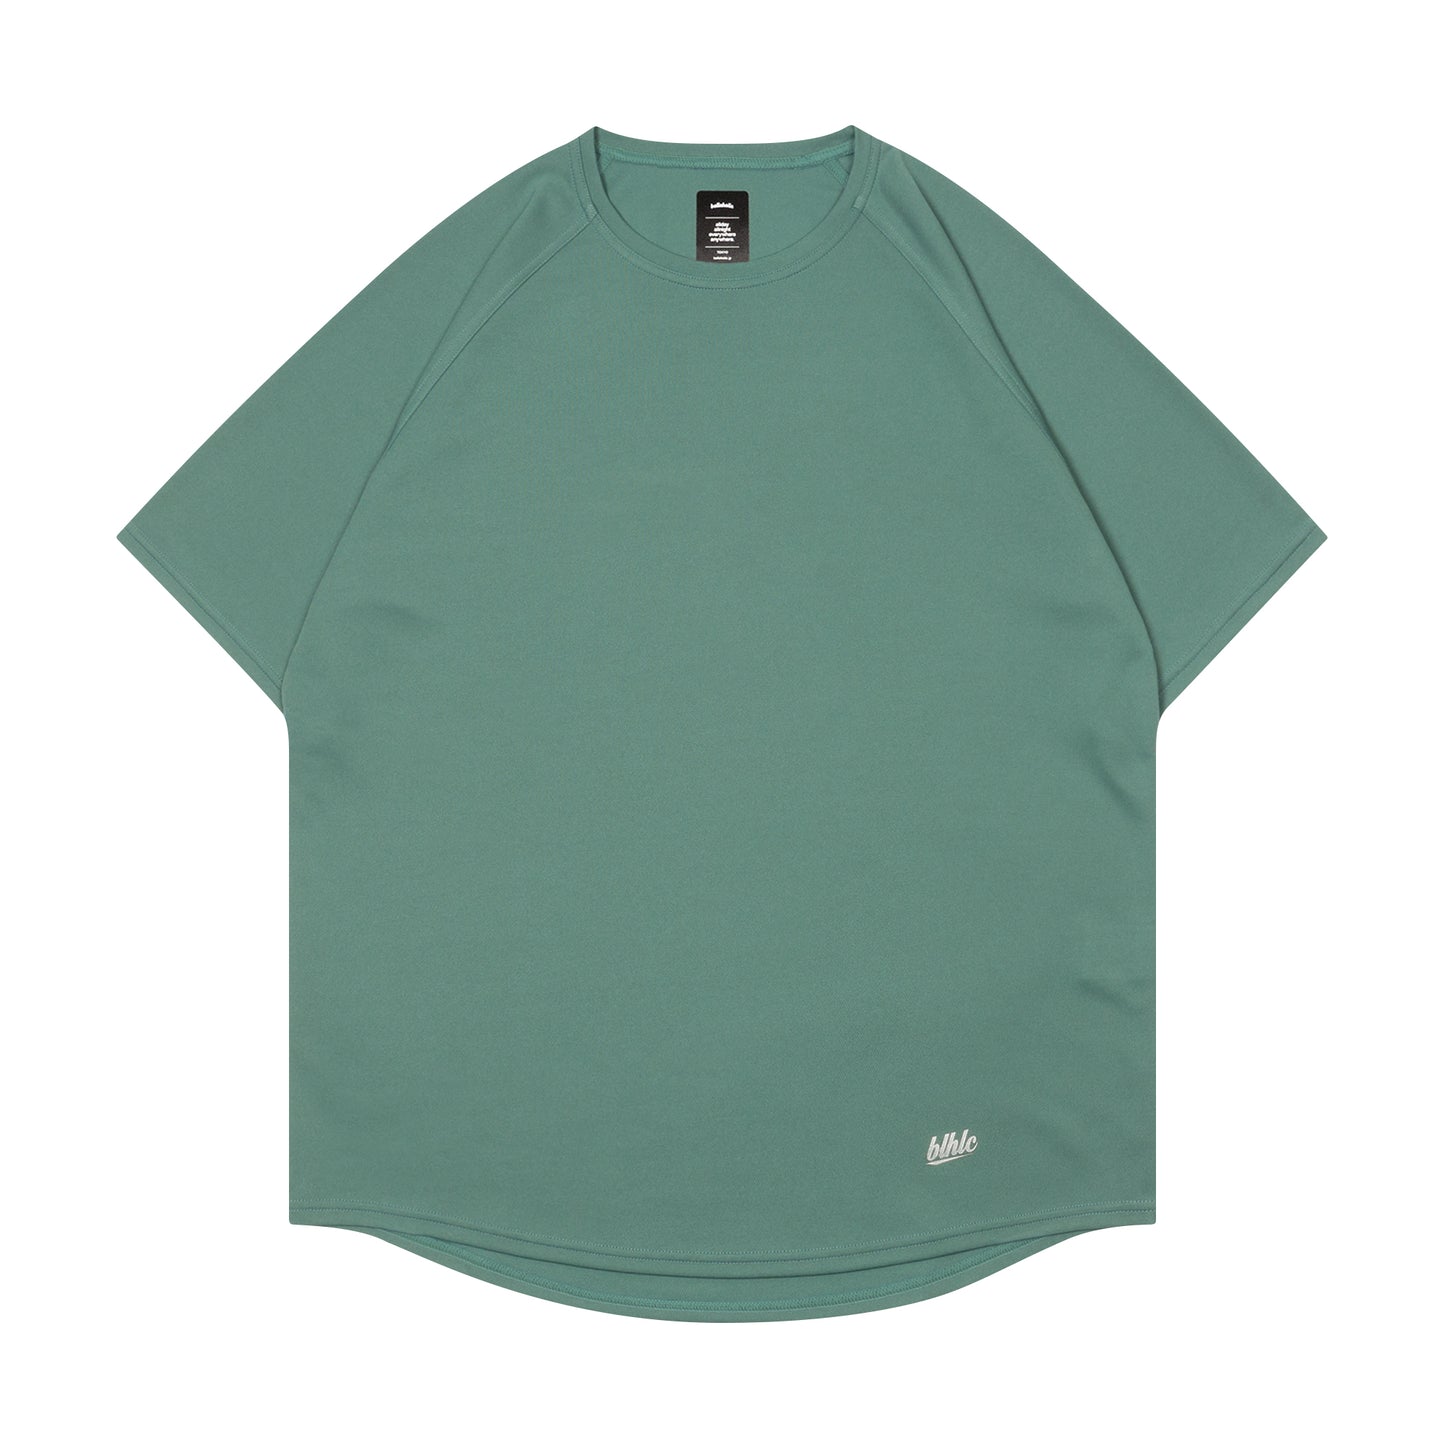 blhlc Back Print Cool Tee (pine green/reflector)